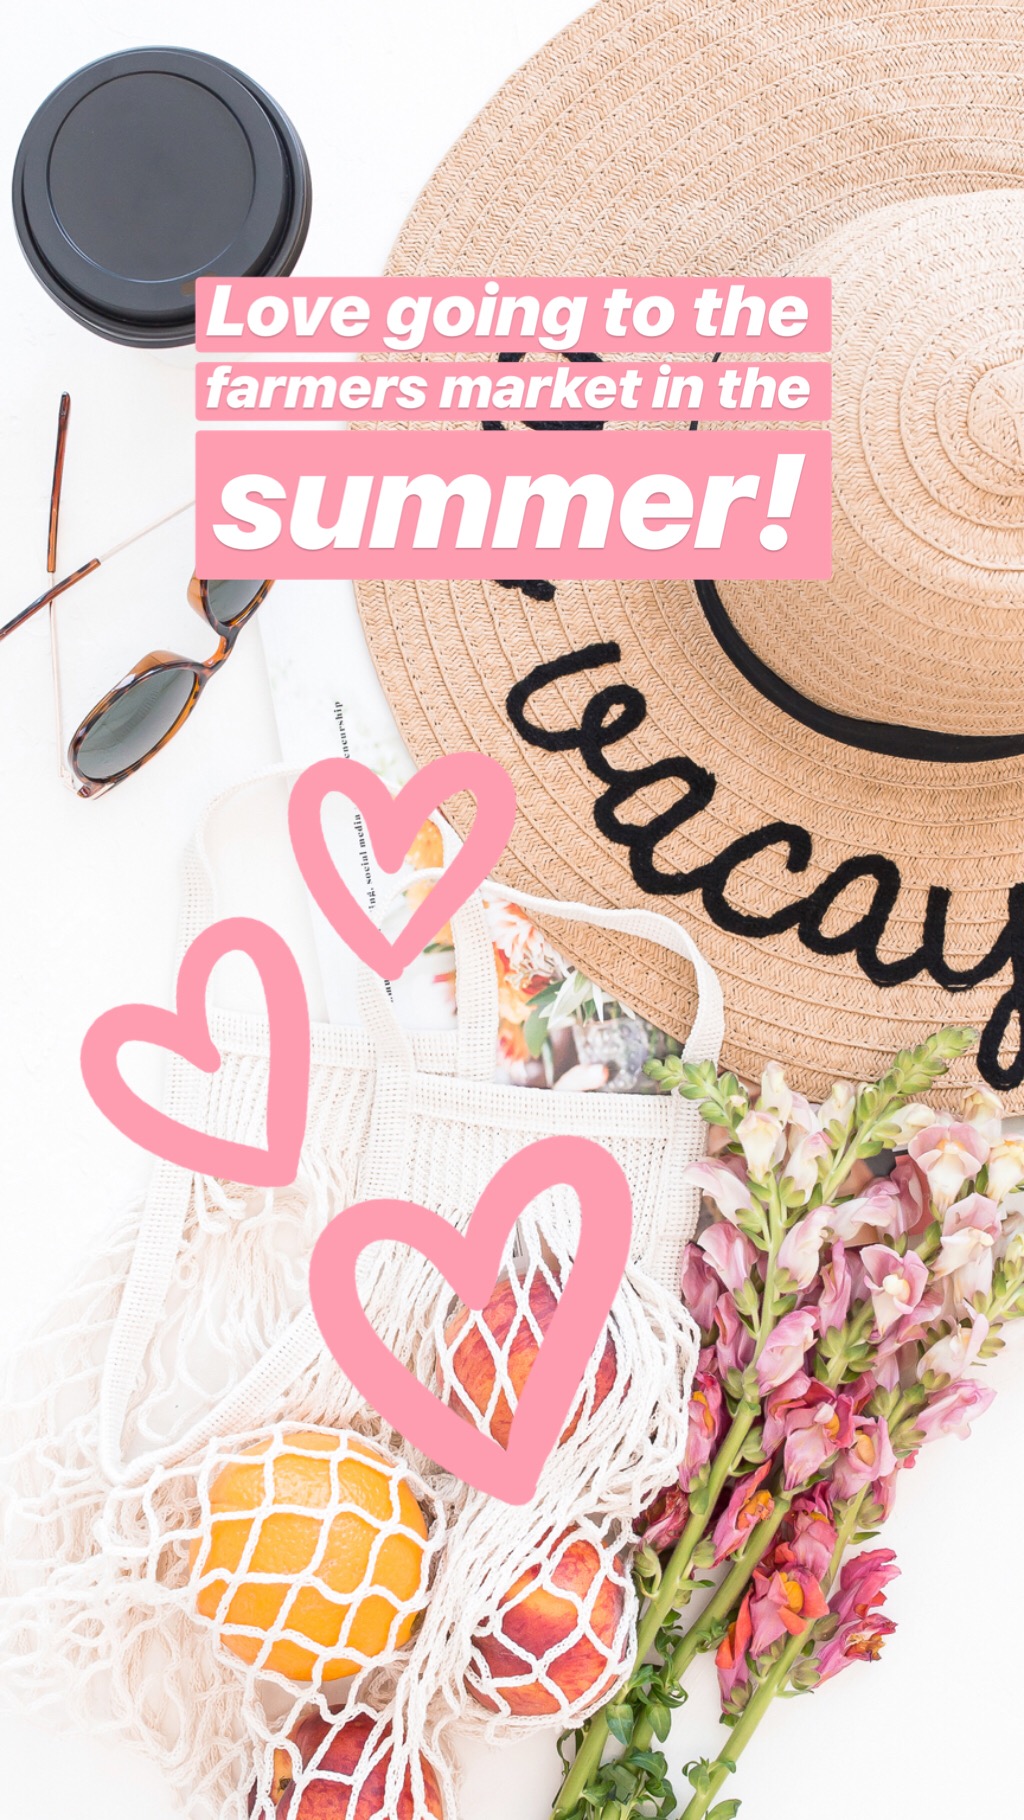 Easily create eye catching Instagram Stories graphics with a Haute Stock Membership! You'll not only get access to beautiful feminine stock photos, you'll also get access to exclusive Graphics Packs with design elements like the Instagram overlay st…